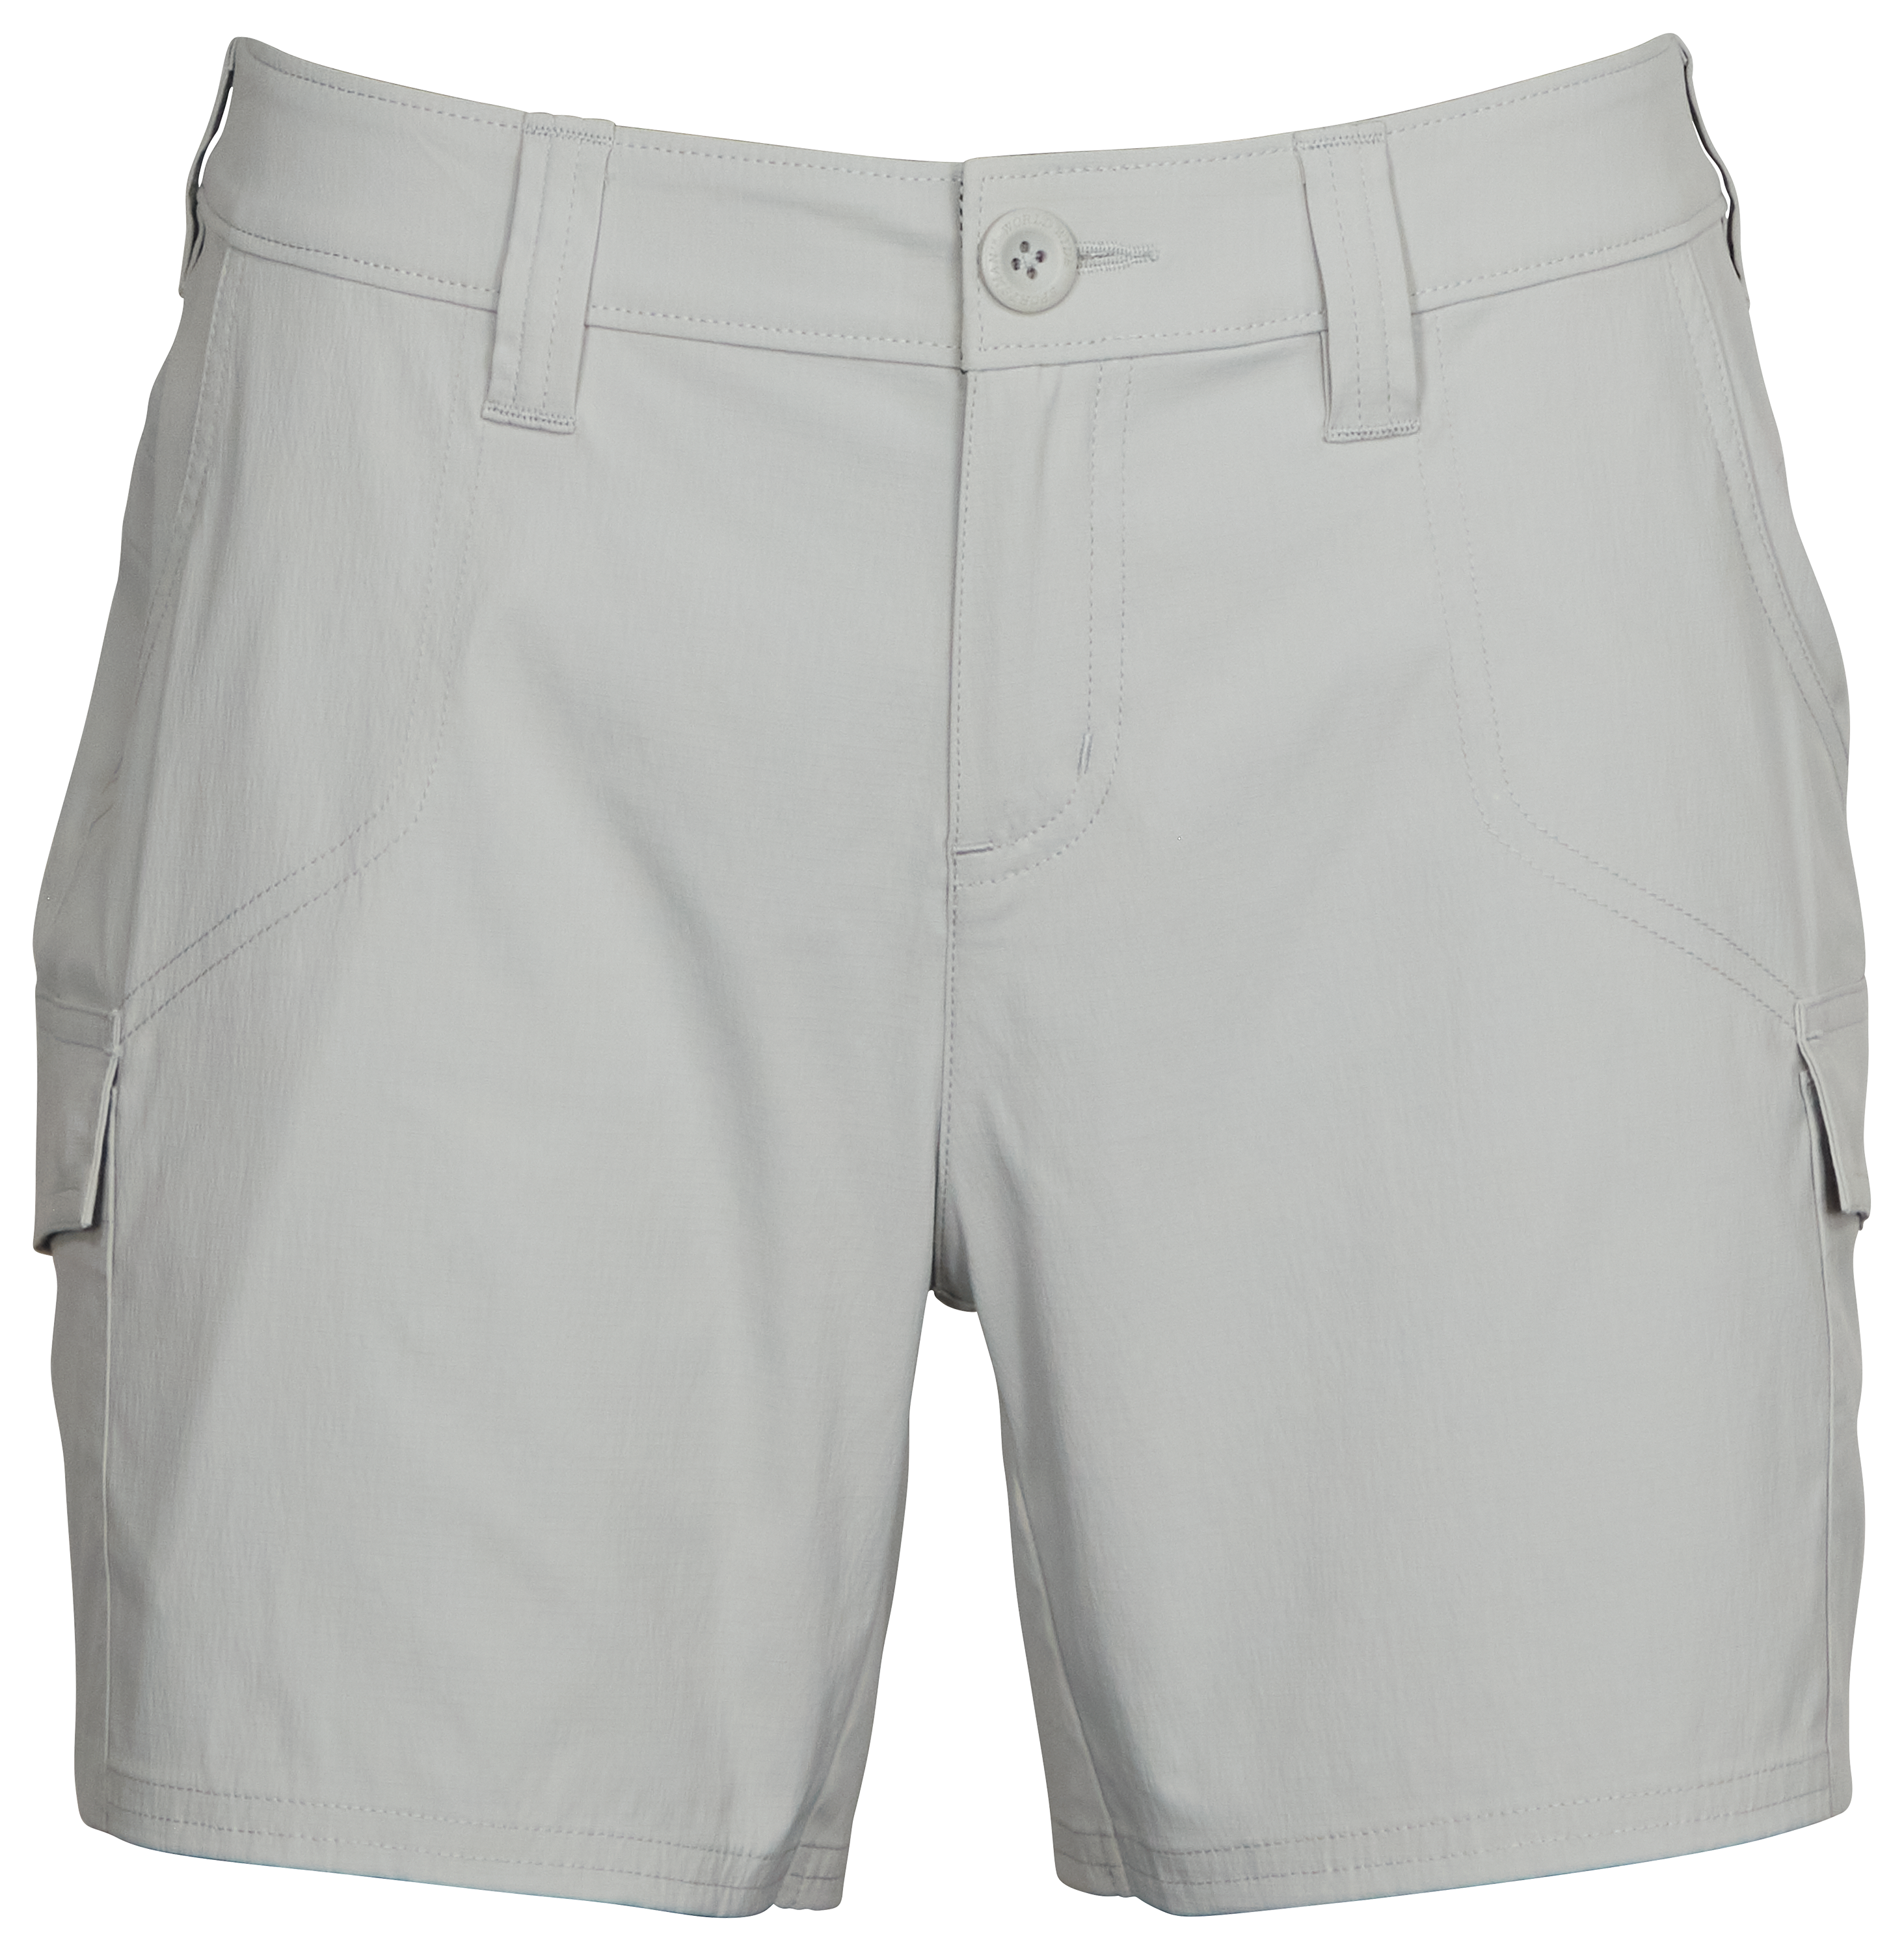 World Wide Sportsman Ripstop Cargo Shorts for Ladies - High Rise - 18